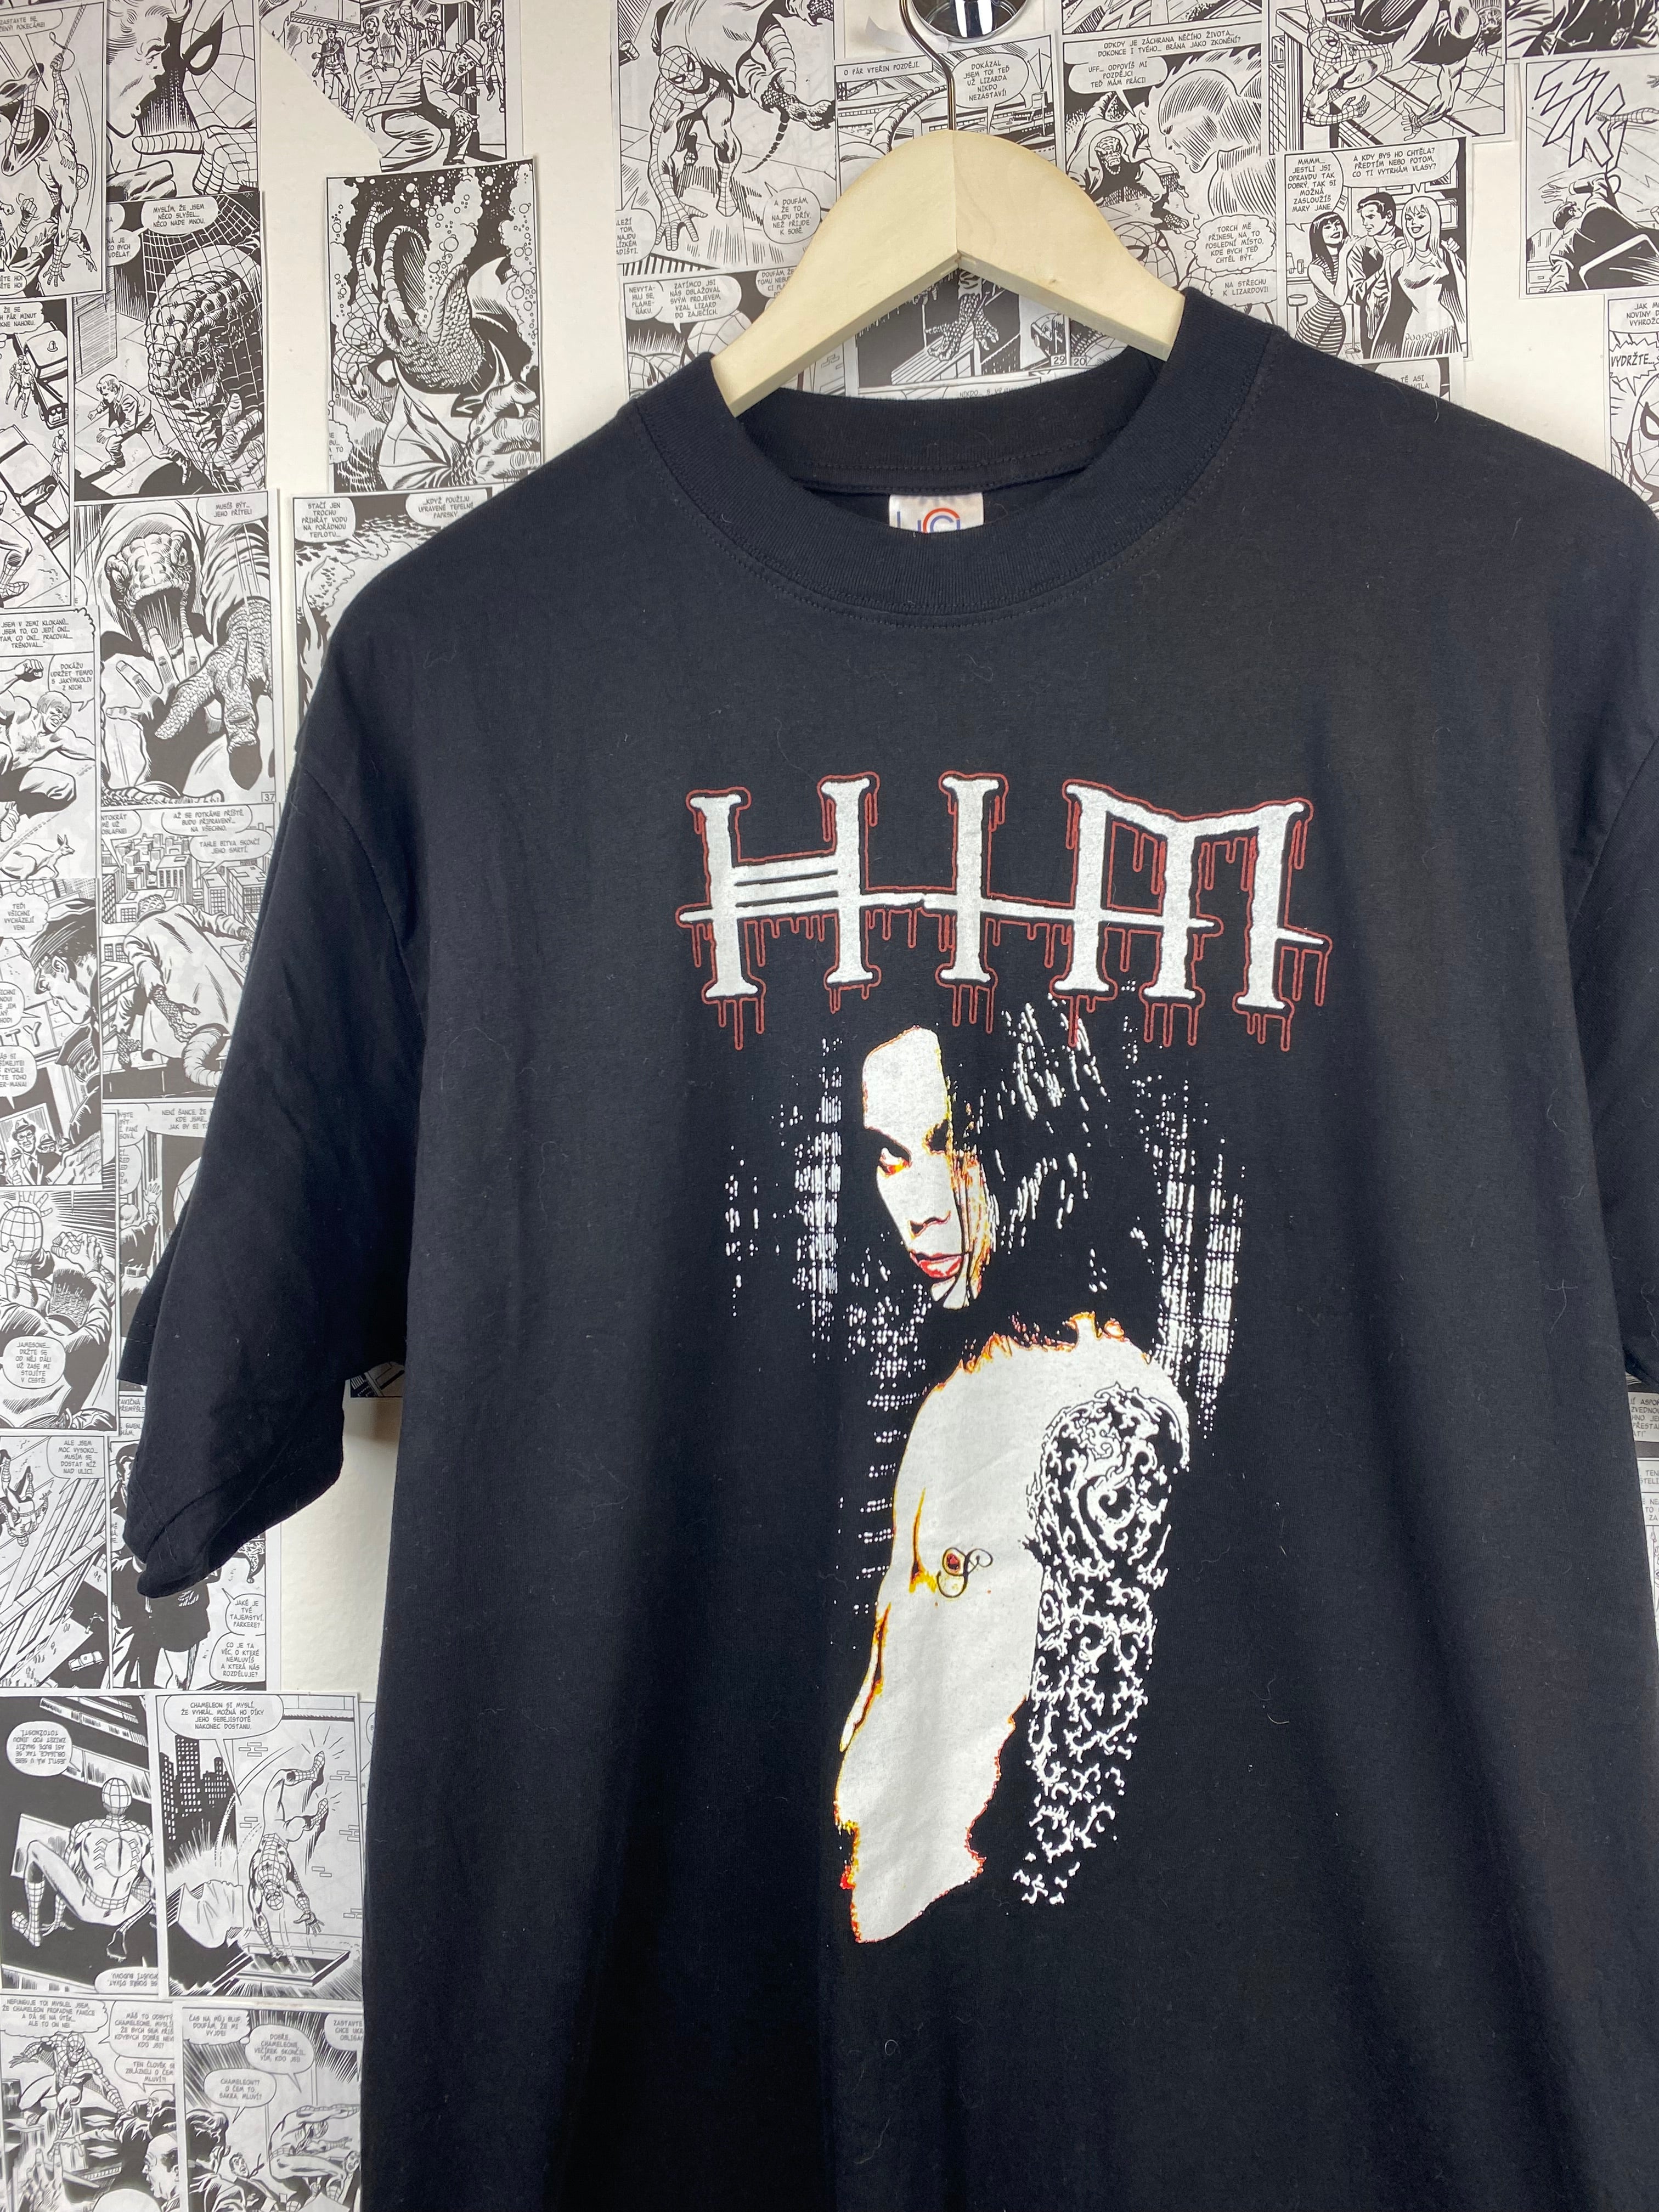 Vintage HIM “Wicked Game” t-shirt - size XL